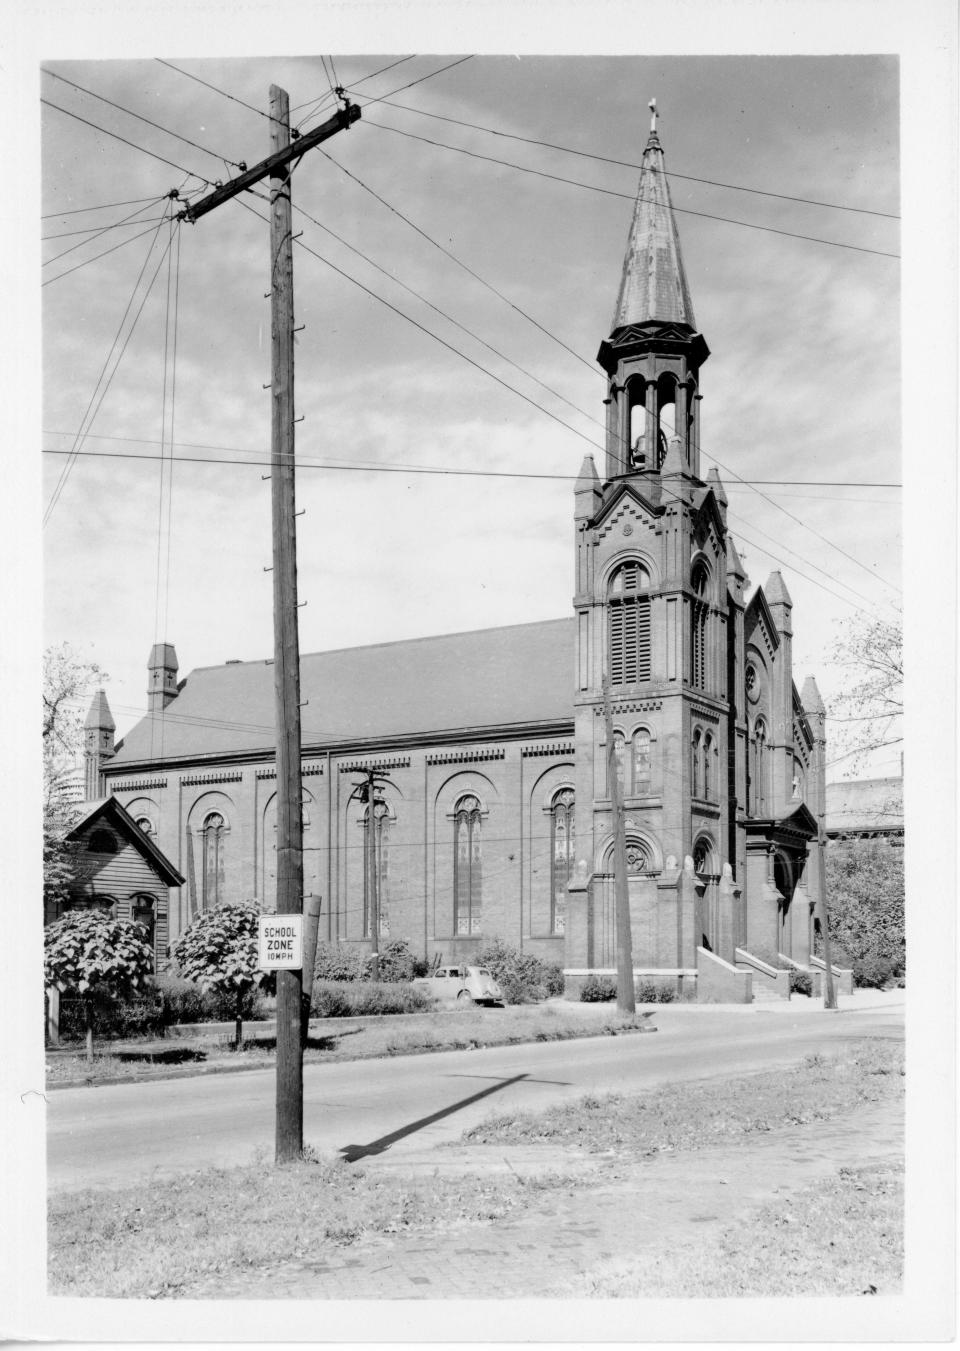 This undated photo shows St. Patrick's church in Peoria.